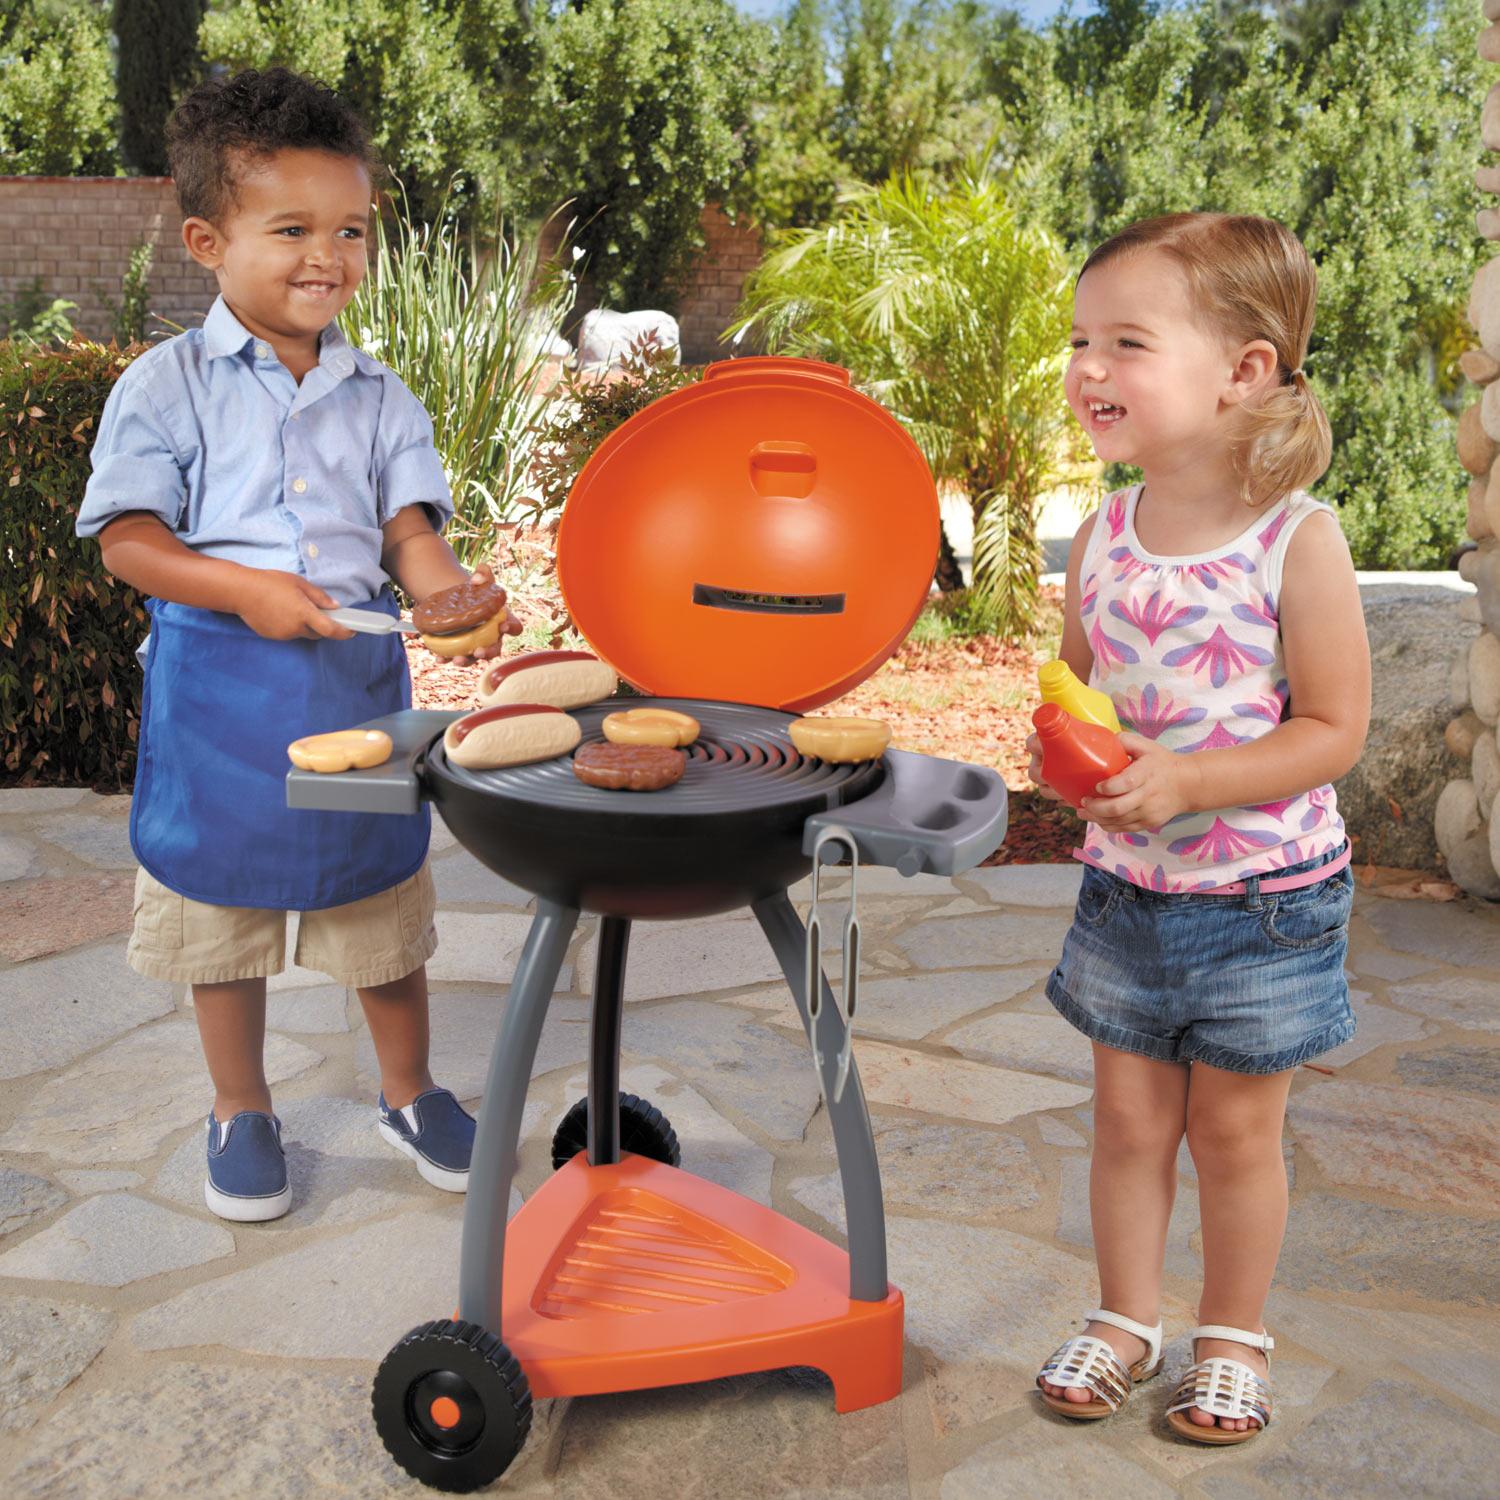 Kids Play Grill - Toy Sizzle 'n Serve Grill